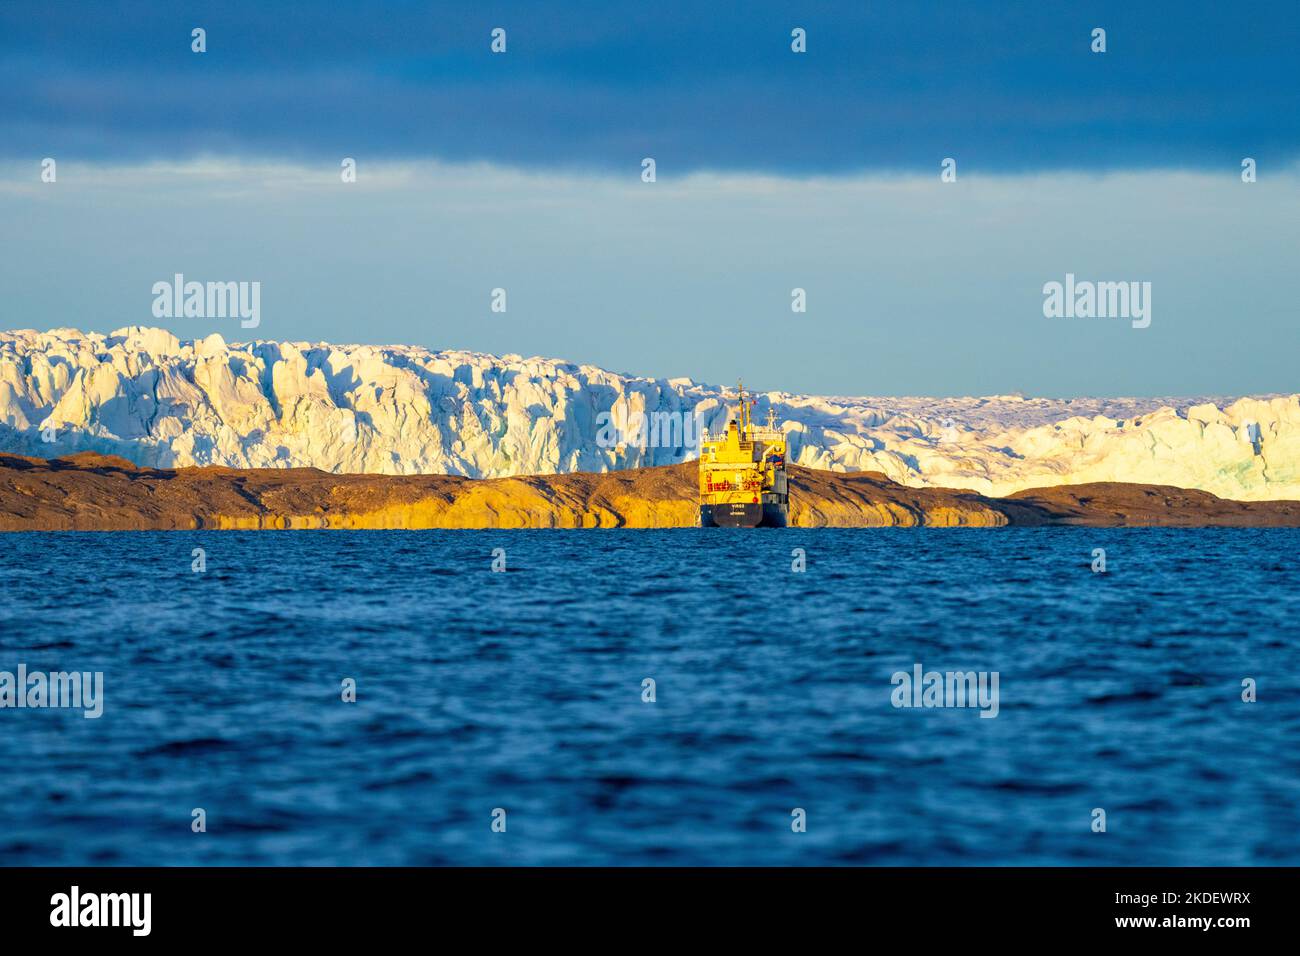 Sun setting North Sea Arctic Landscape, Longyearbyen, Svalbard, Norway Photographed in September Stock Photo